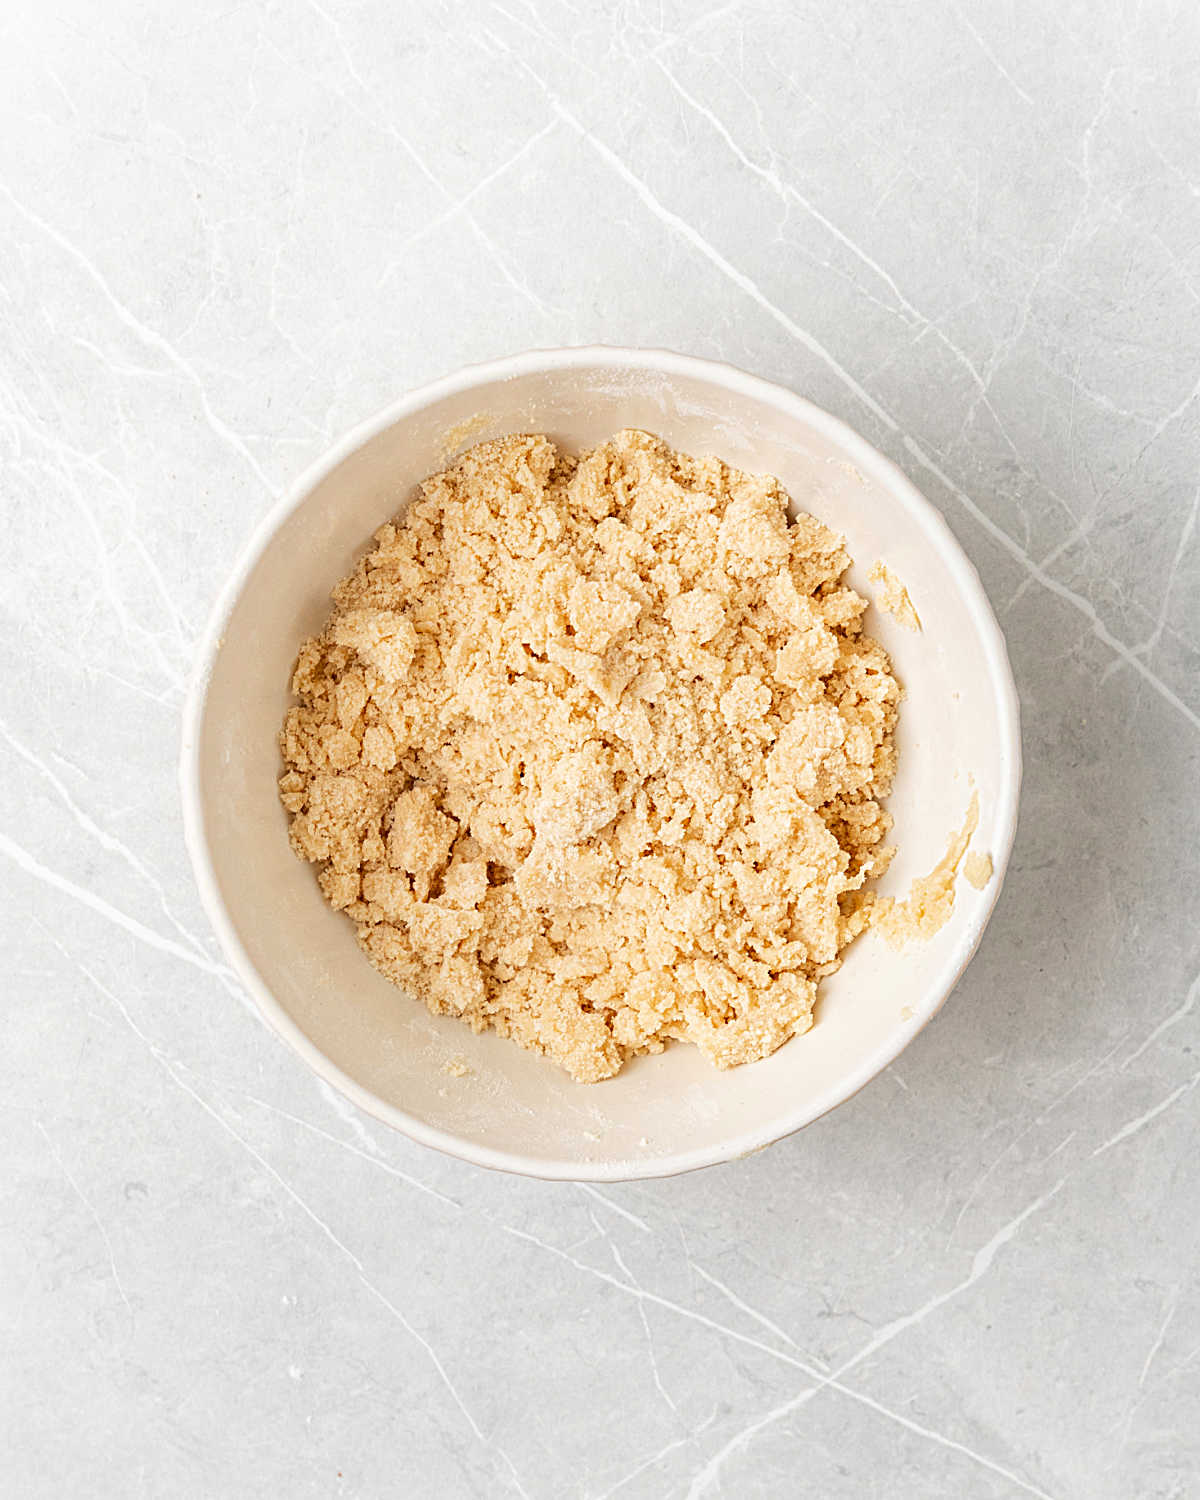 Crumb topping with brown sugar in a white bowl on a light grey surface. 